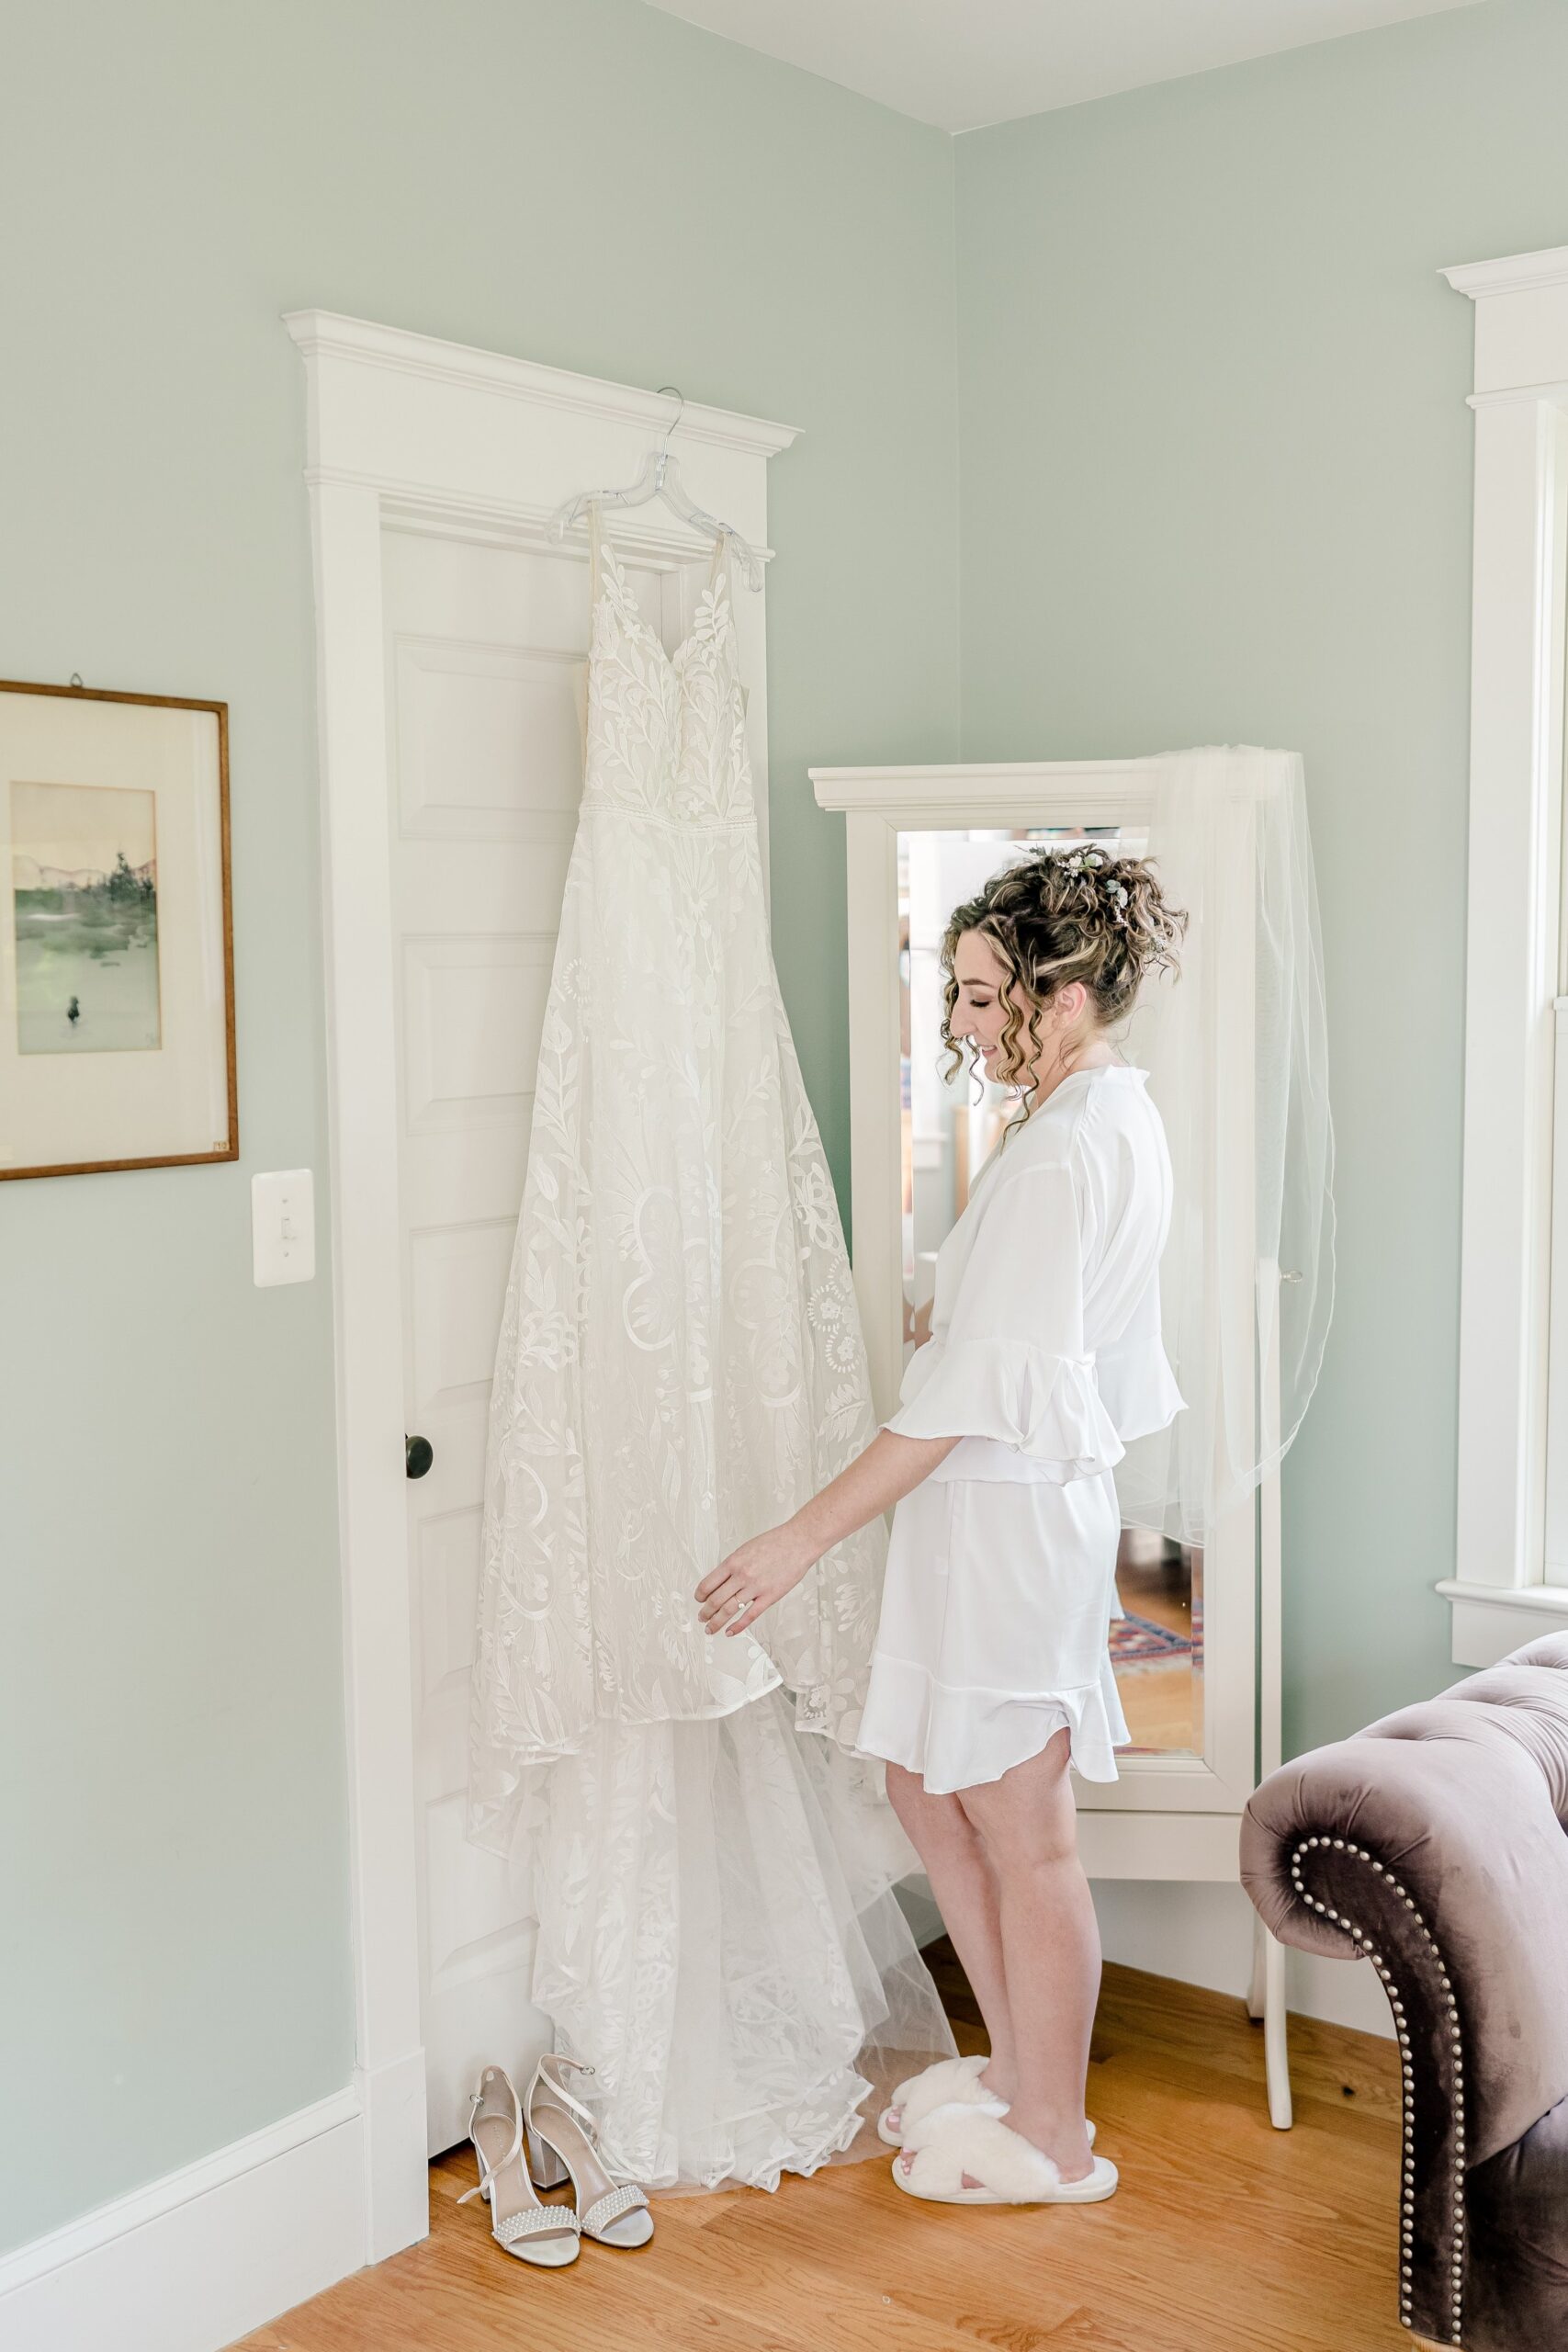 A bride preparing to get dressed for her wedding at one of the best wedding venues in Northern Virginia